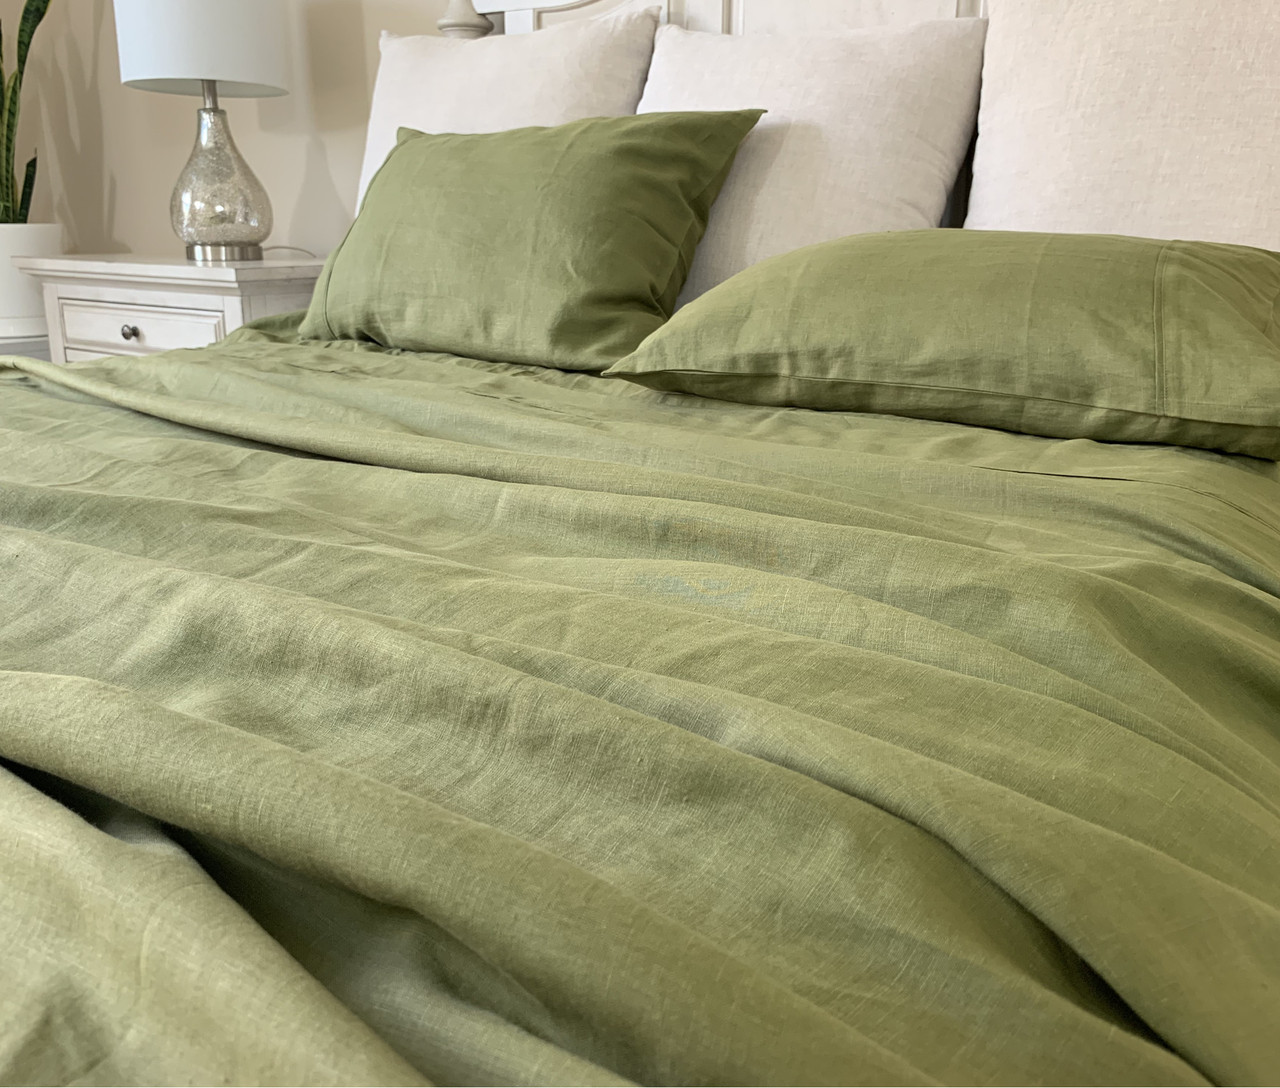 https://cdn11.bigcommerce.com/s-gp626m/images/stencil/1280x1280/products/1391/11785/Rosemary_Green_Linen_Bed_Sheets__31168.1590433806.jpg?c=2